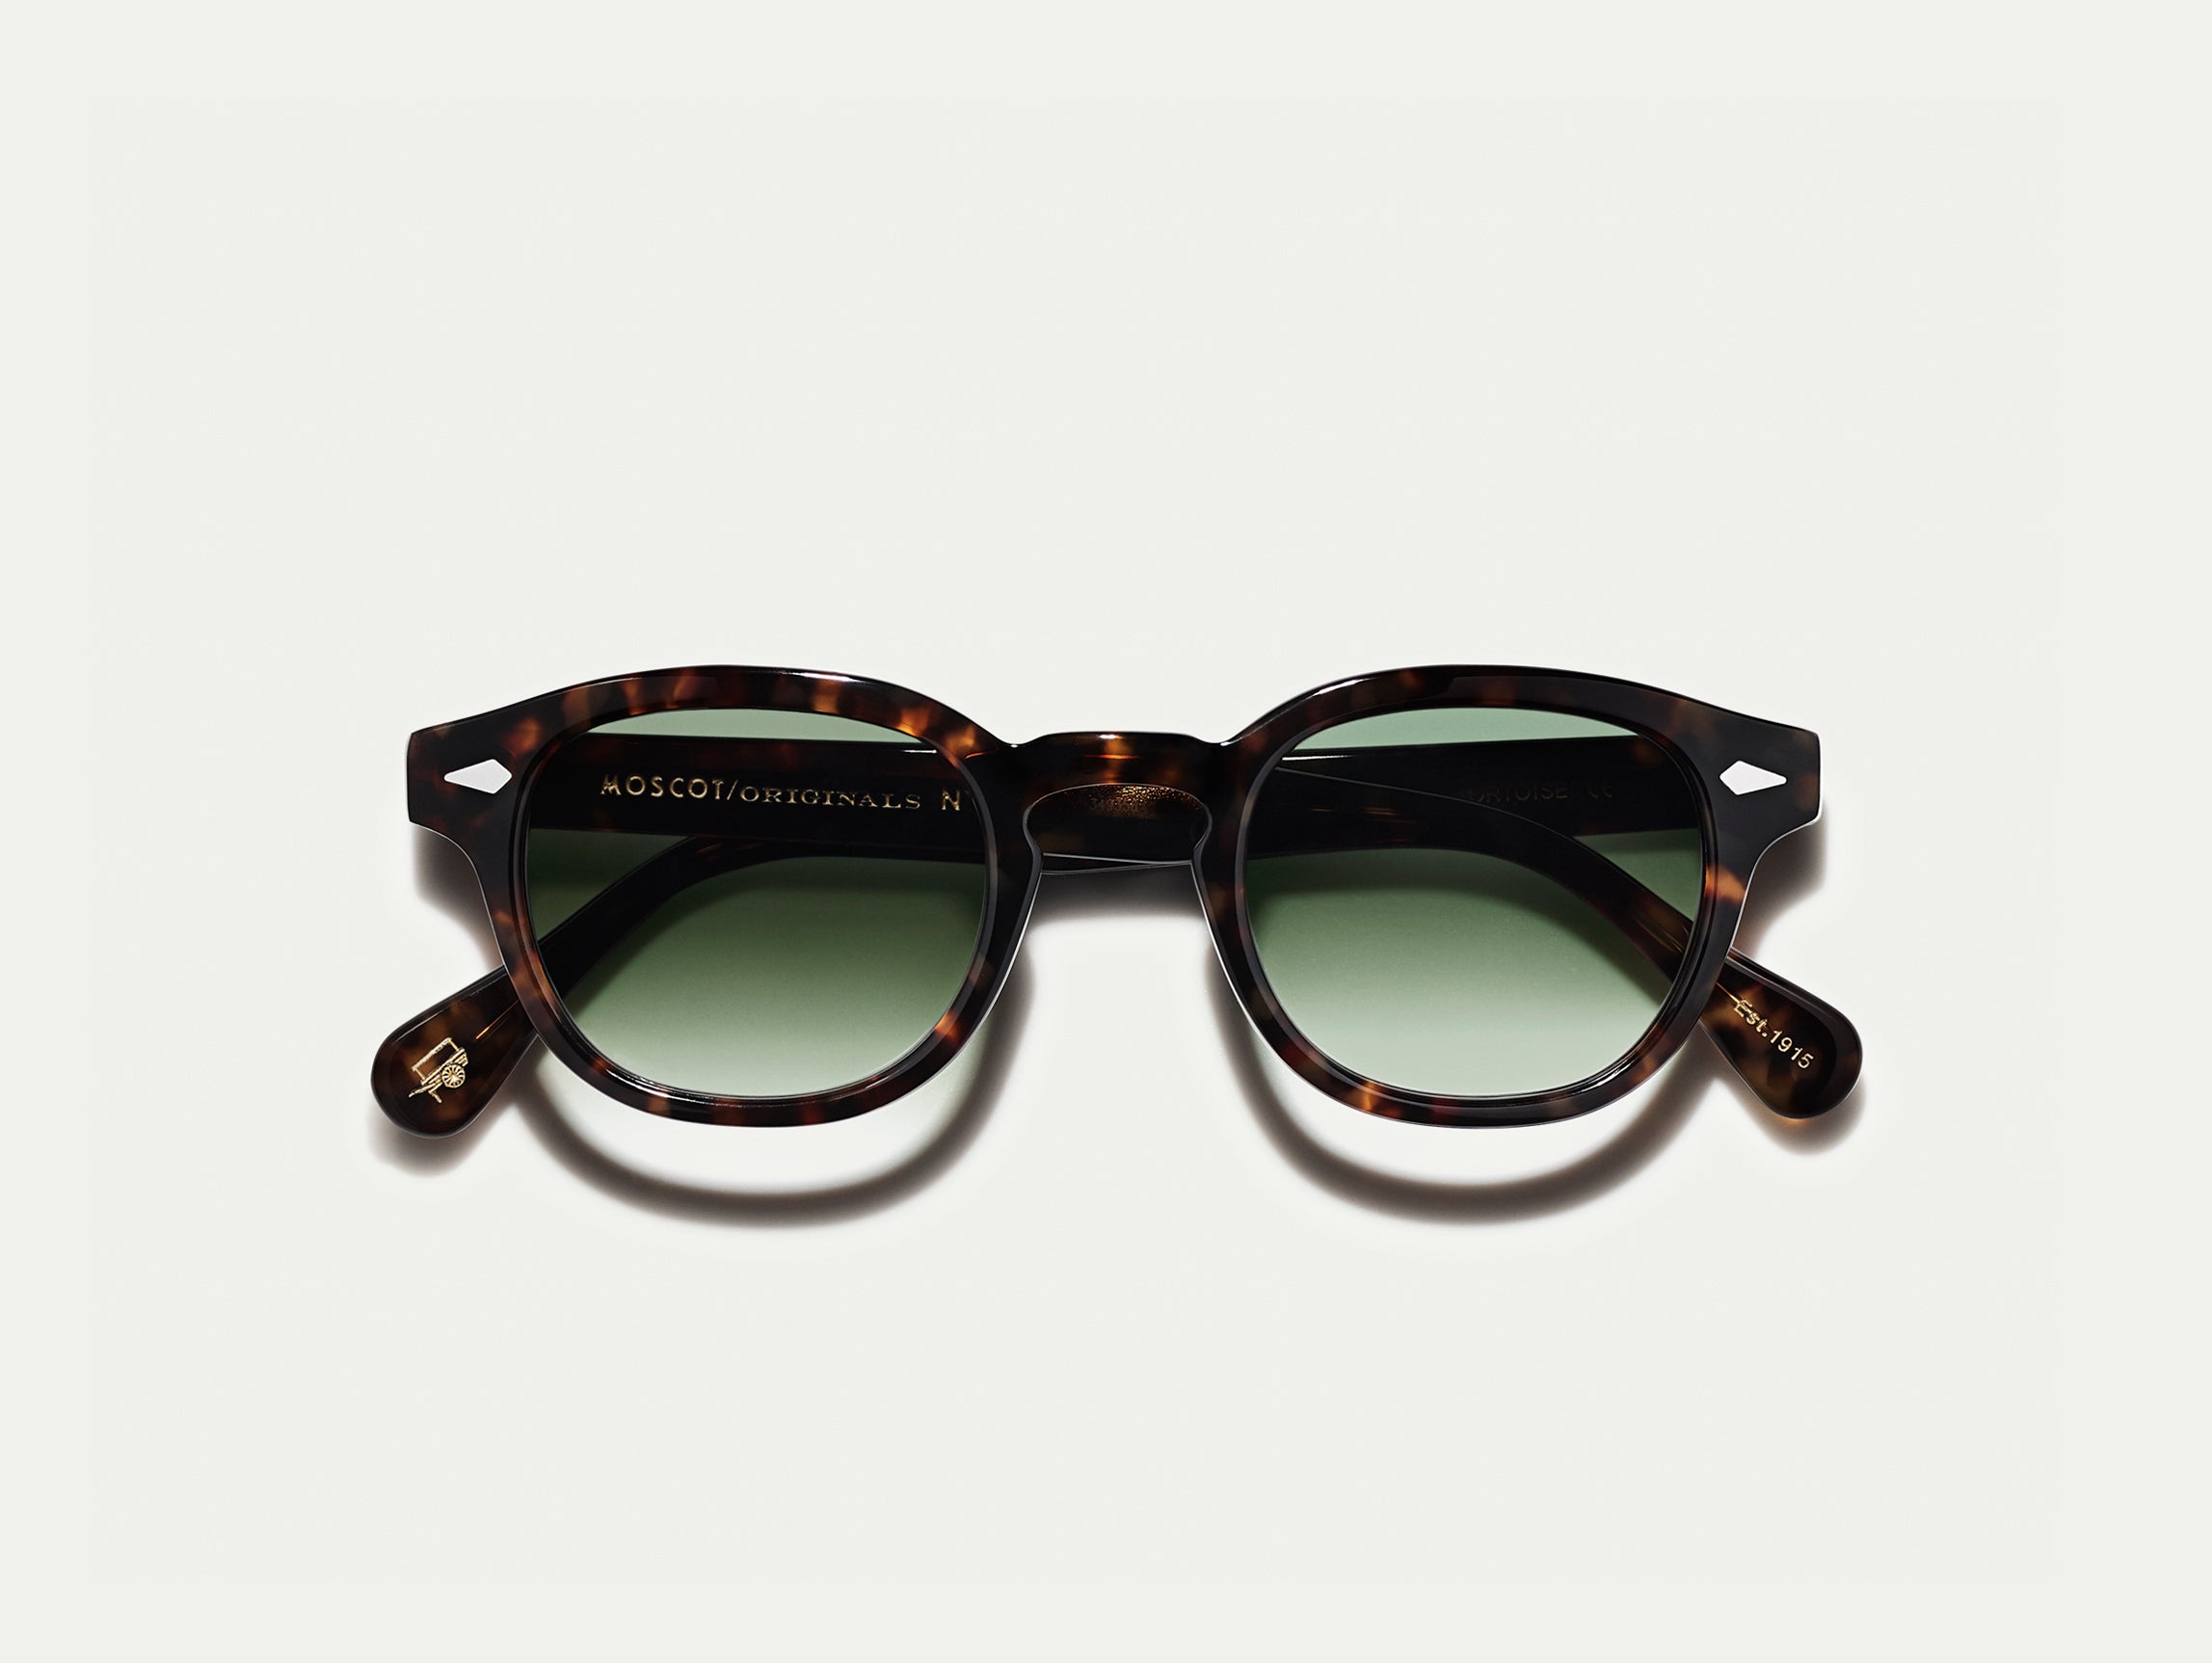 #color_g-15 fade | The LEMTOSH Tortoise with G-15 Fade Tinted Lenses